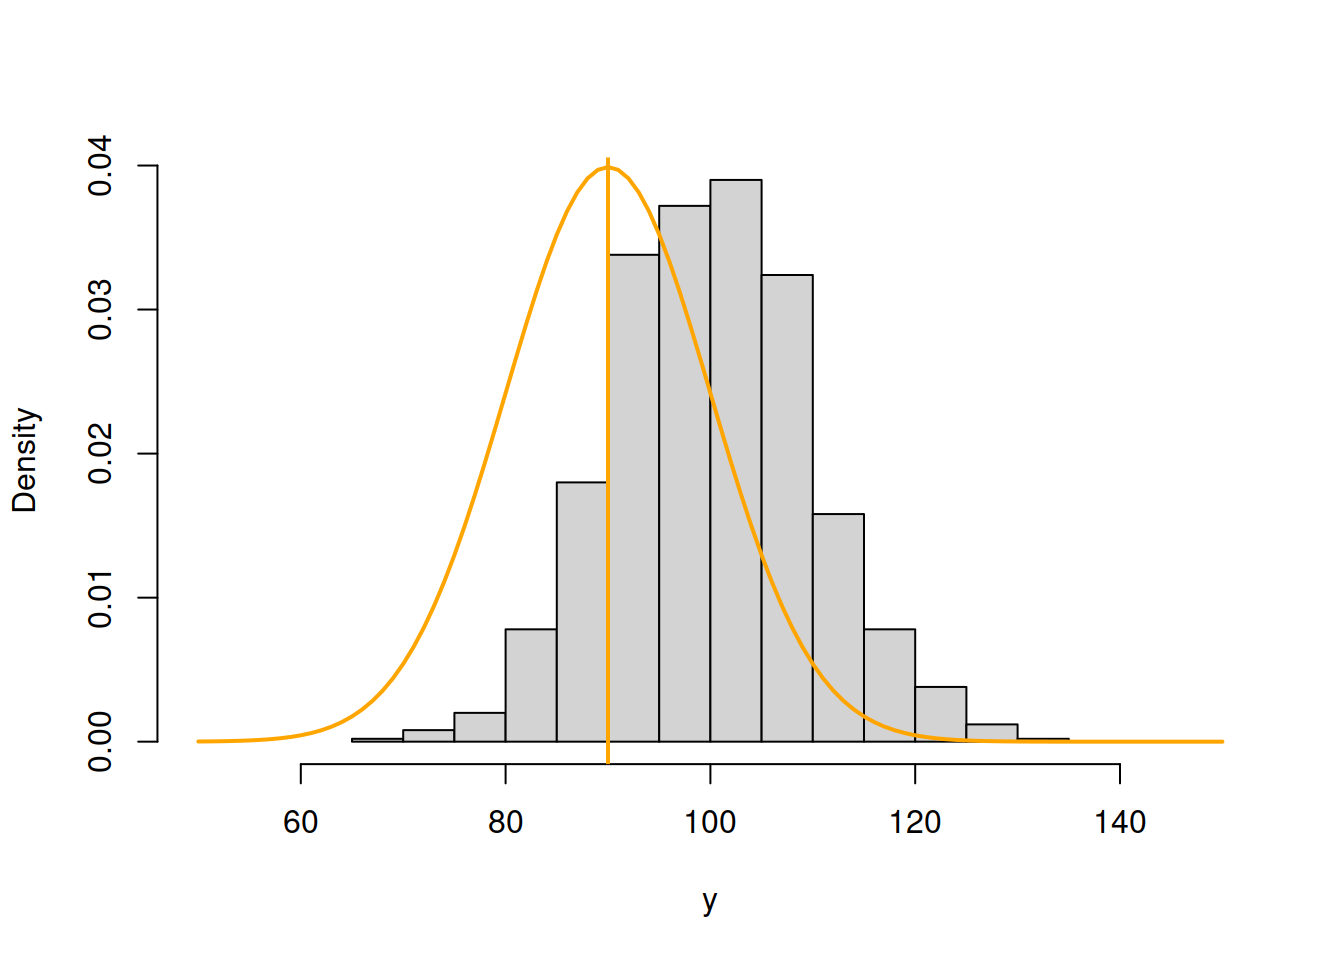 ML example with Normal curve and $\hat{\mu}_y=90$ and $\hat{\sigma}=10$